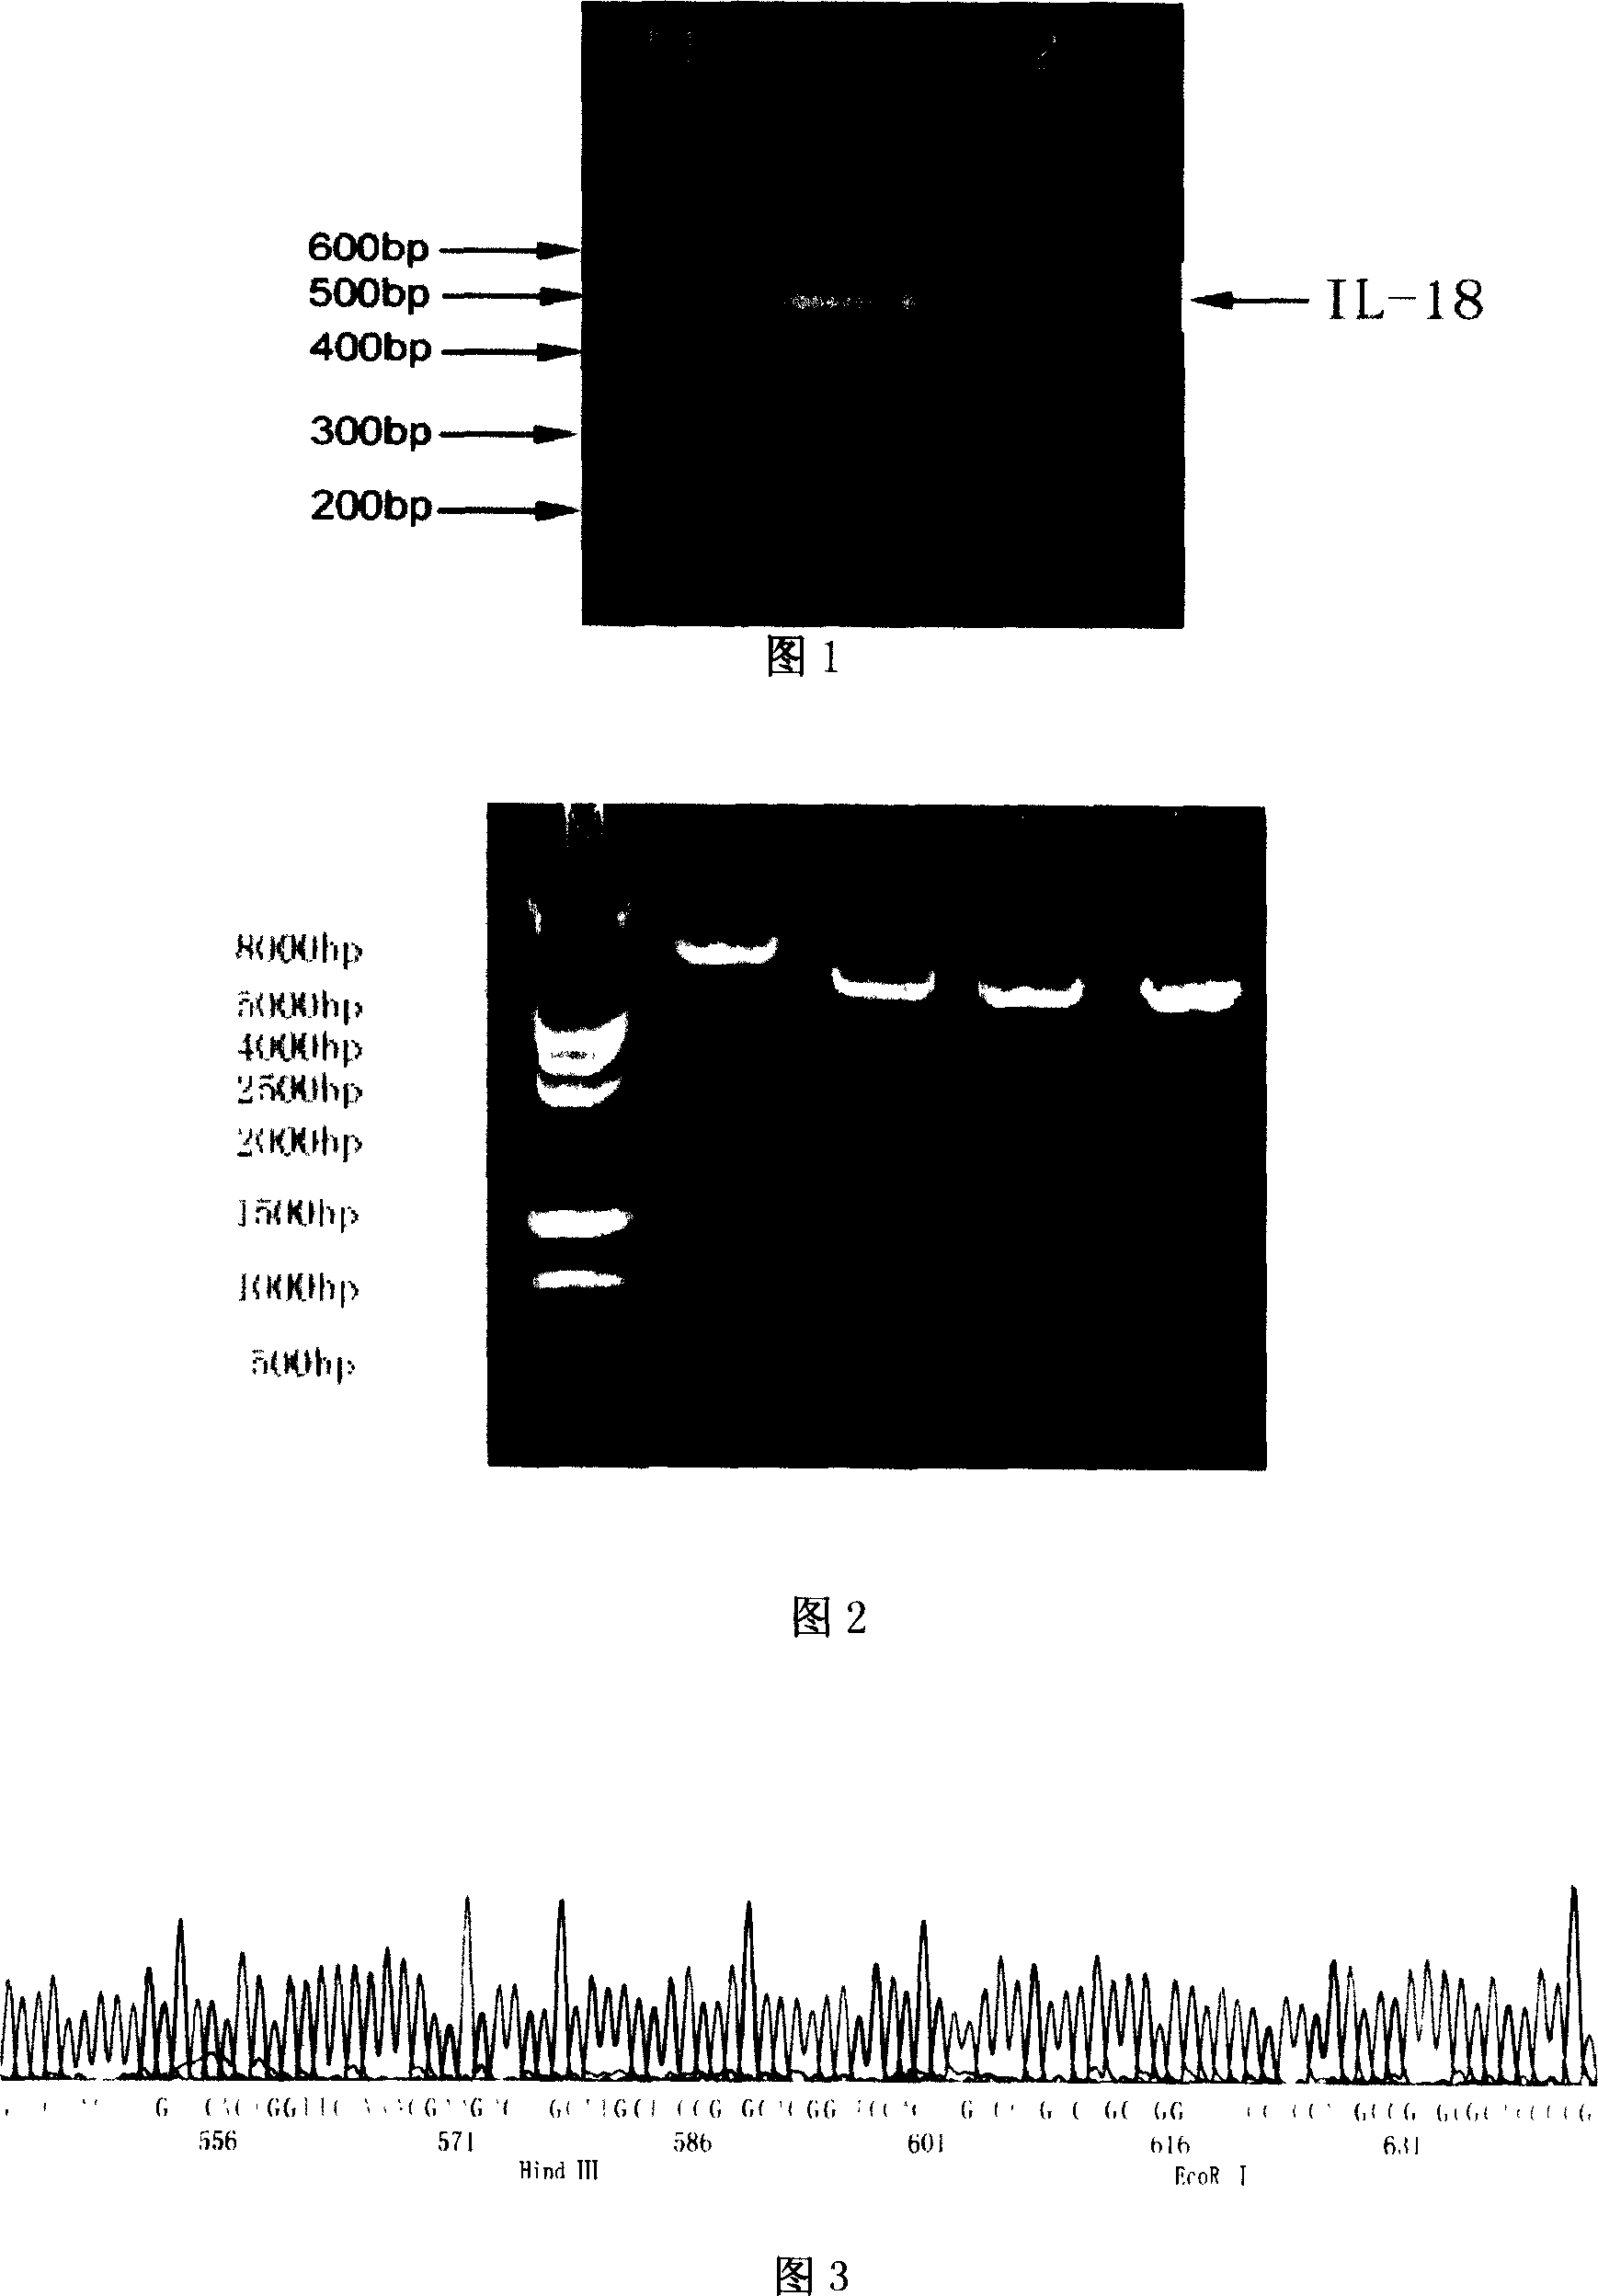 Fusion gene vector construction and expression as well as uses